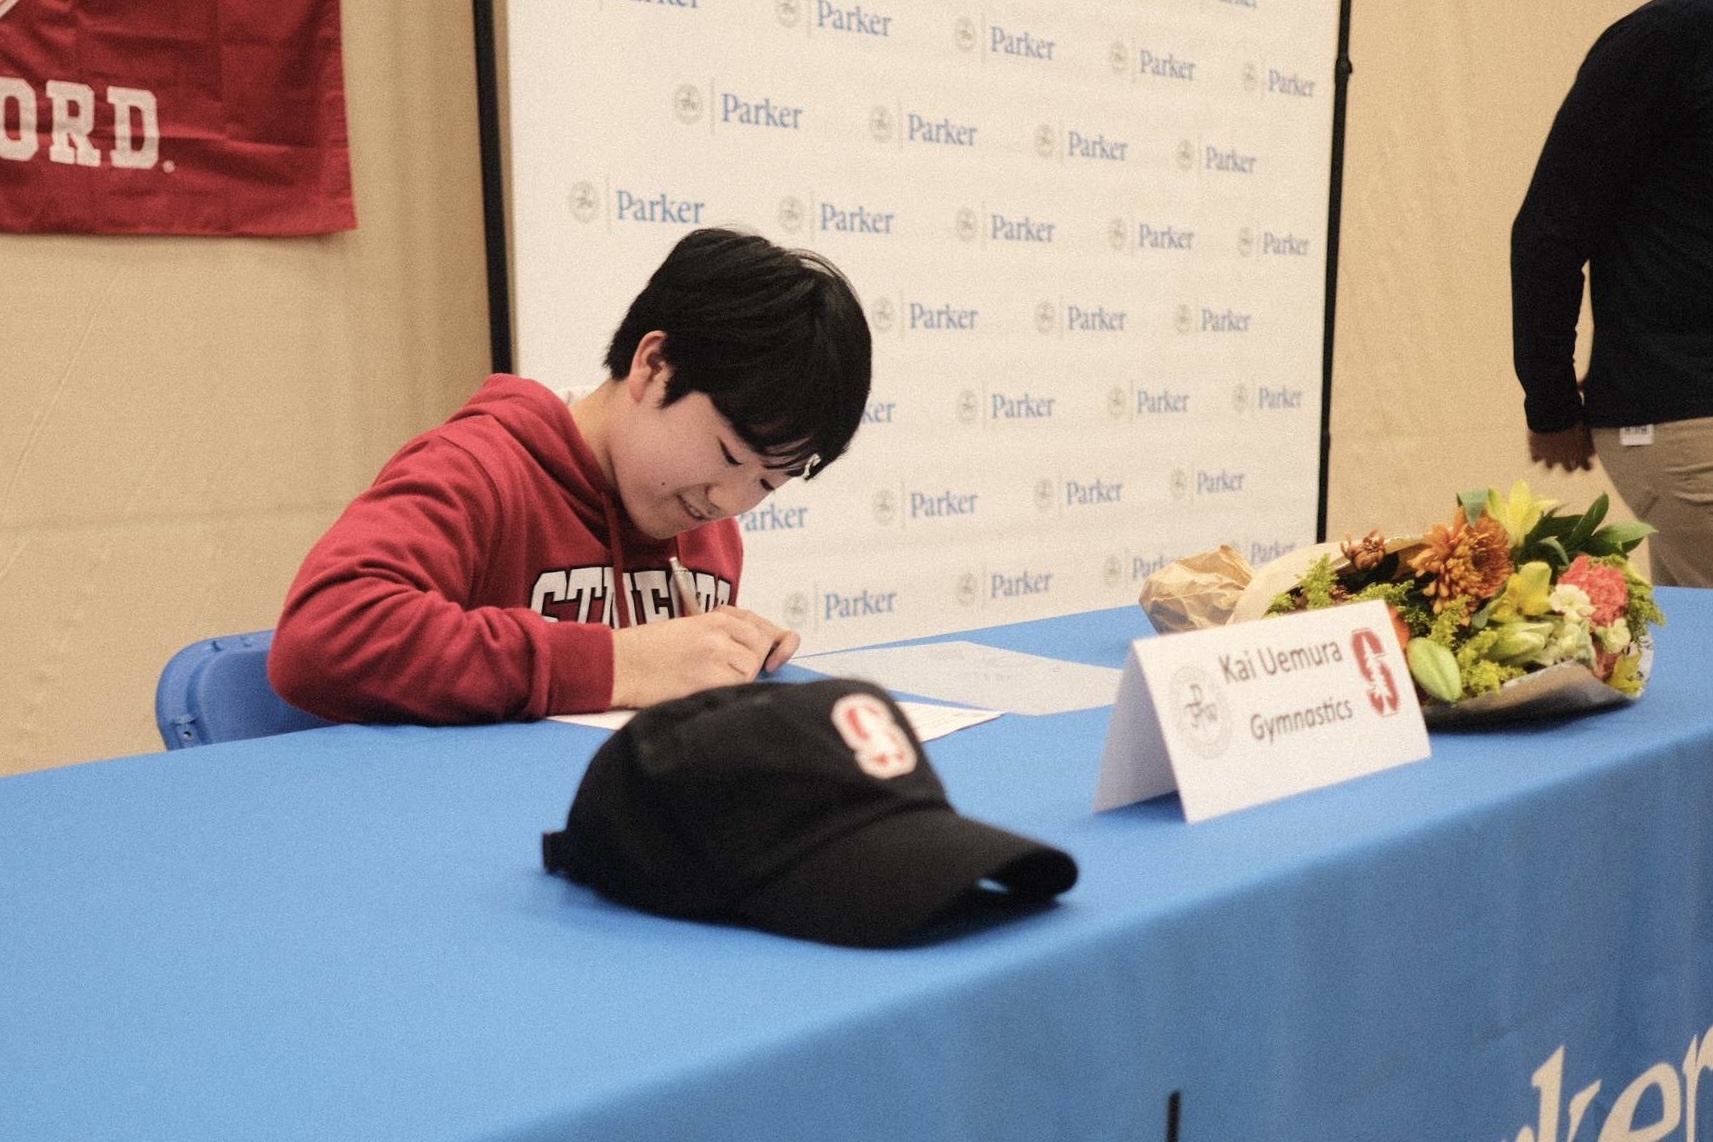 Kai Uemura signs his official commitment to Stanford University for gymnastics in the Draft gym.